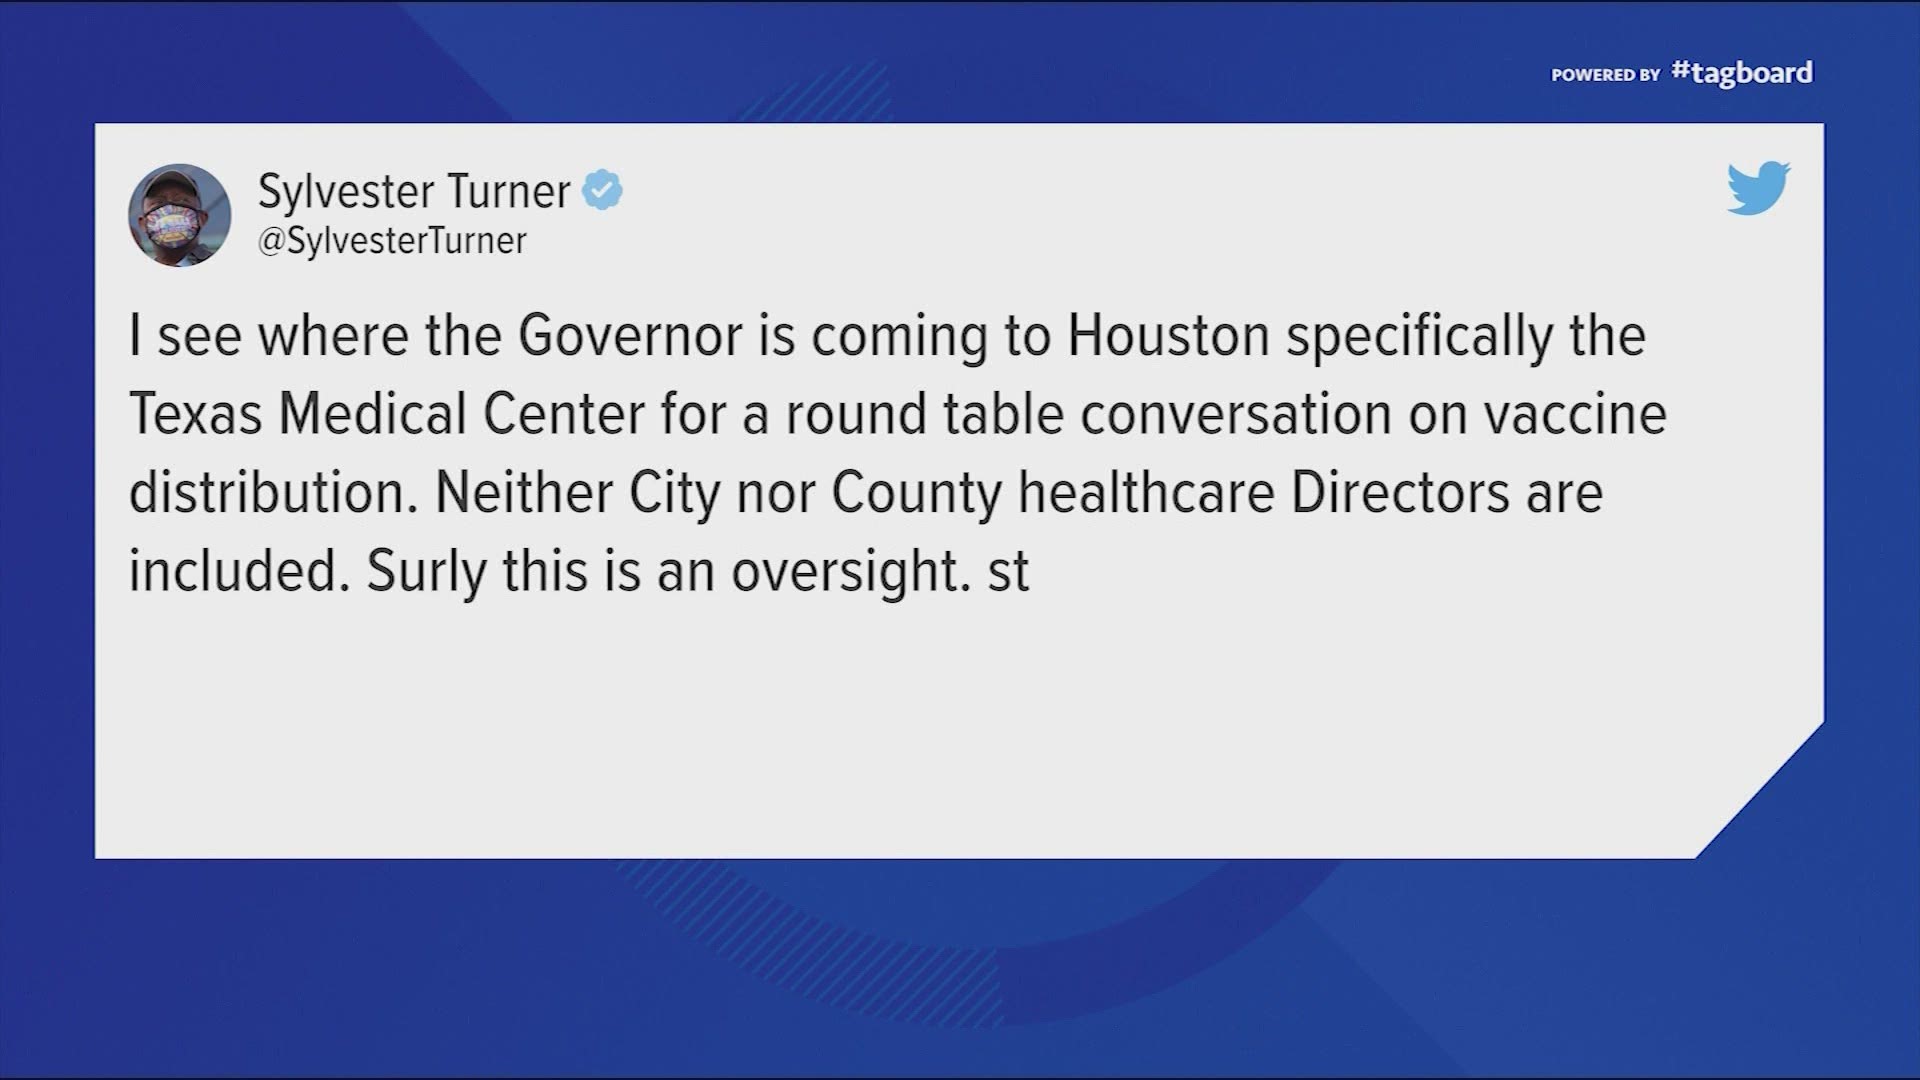 Gov. Abbott is in Houston discussing the future of Texas vaccination efforts with TMC doctors and Mayor Turner feels local experts should have been included.